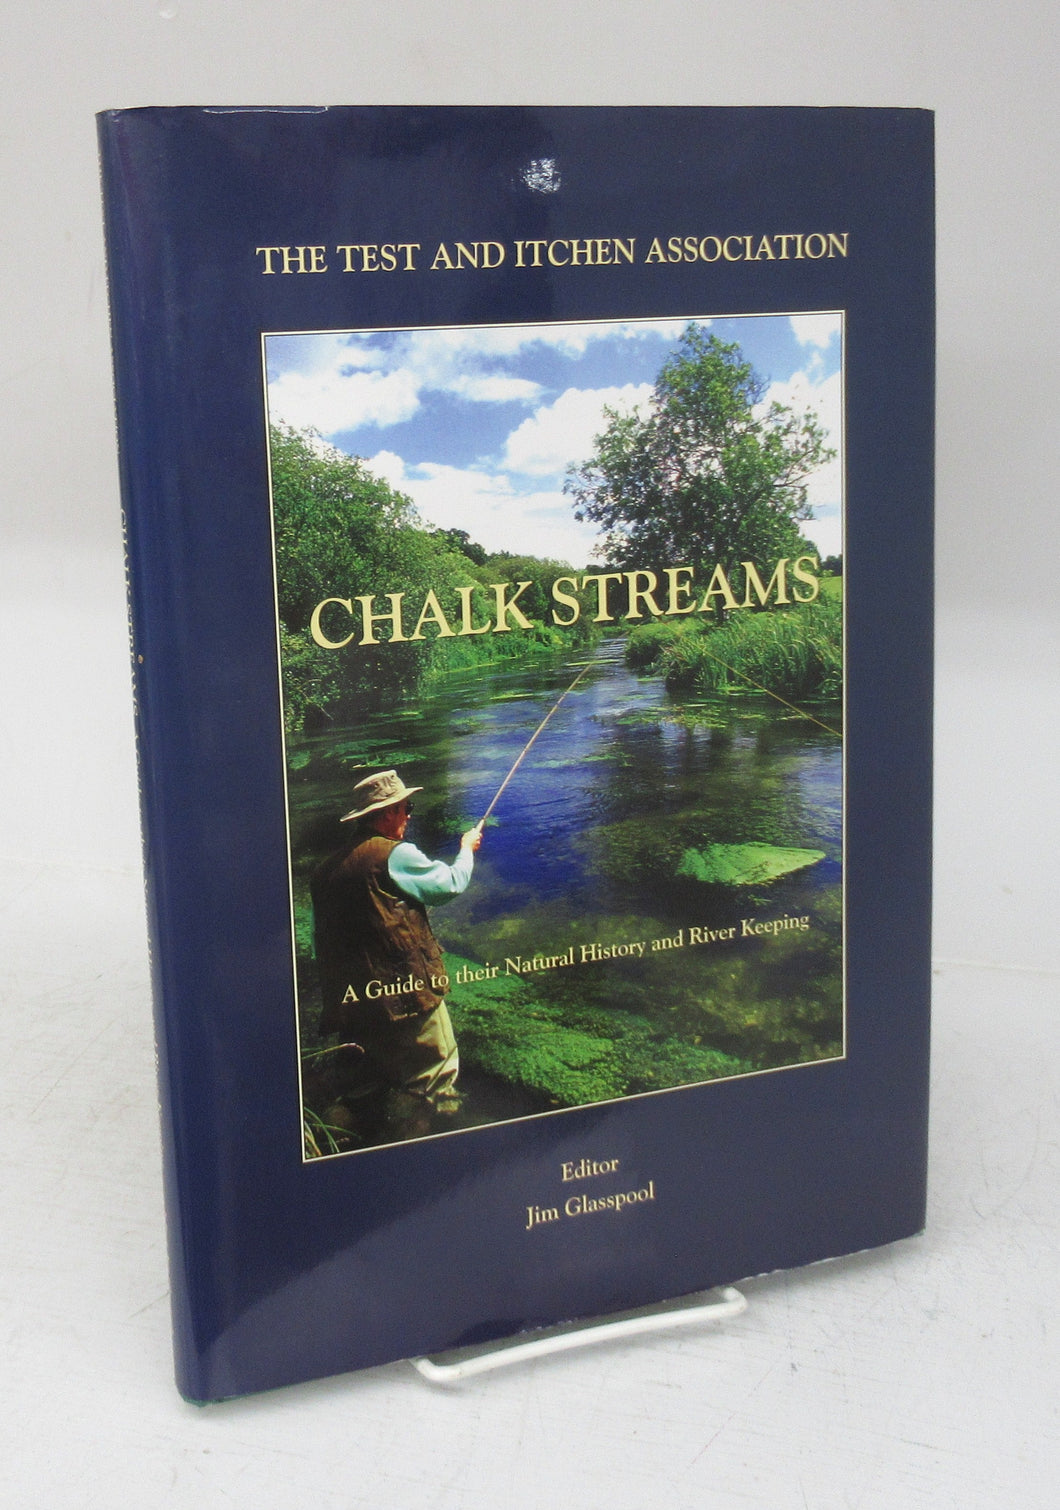 Chalk Streams: A Guide to their Natural History and River Keeping